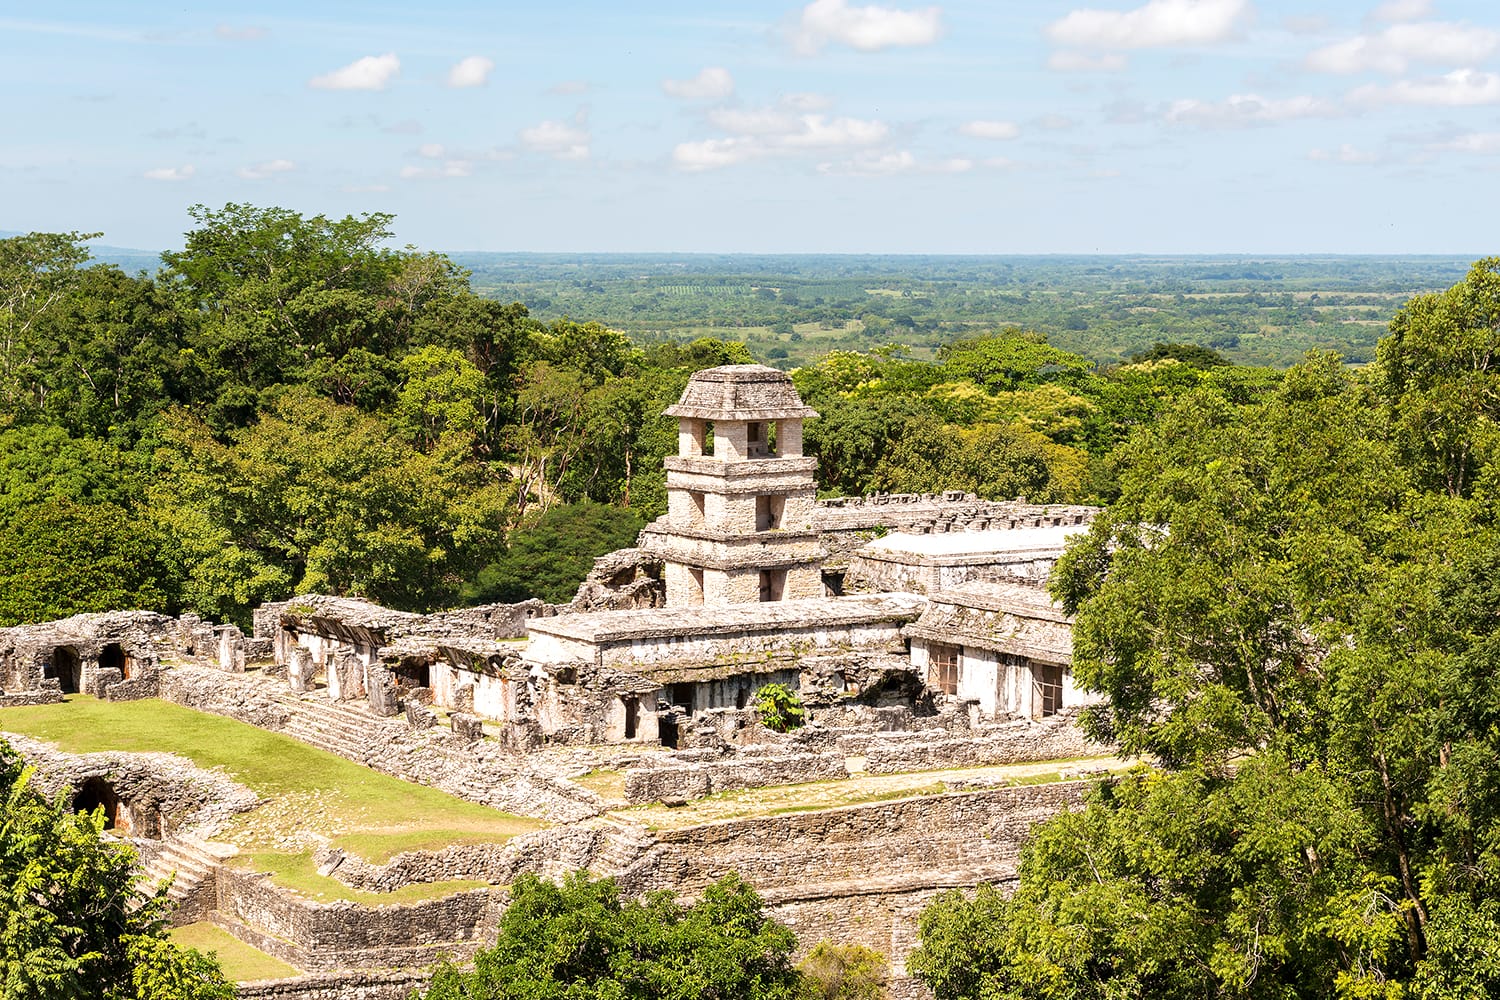 High angle view of the ancient Mayan Palace at the heritage site in Palenque, Mexico